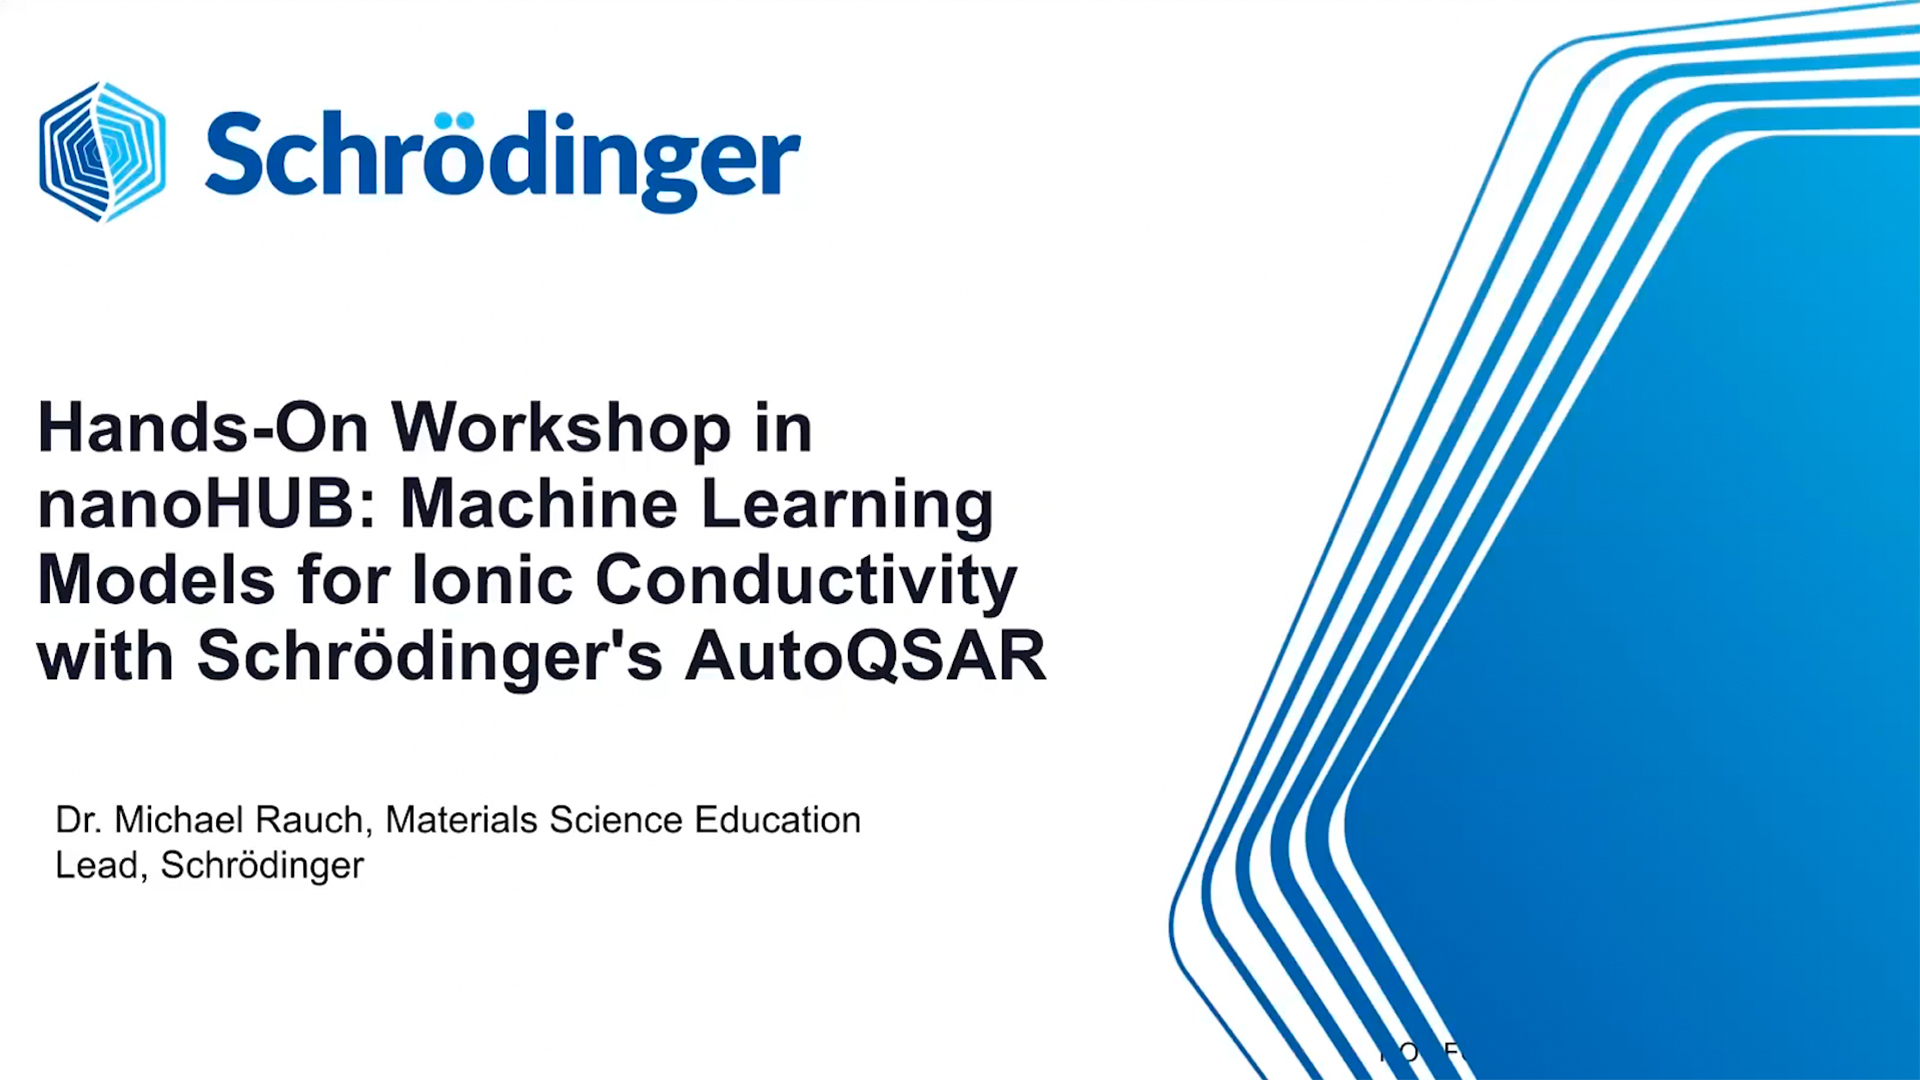 Hands-On Workshop in nanoHUB: Machine Learning Models for Ionic Conductivity with Schrödinger's AutoQSAR